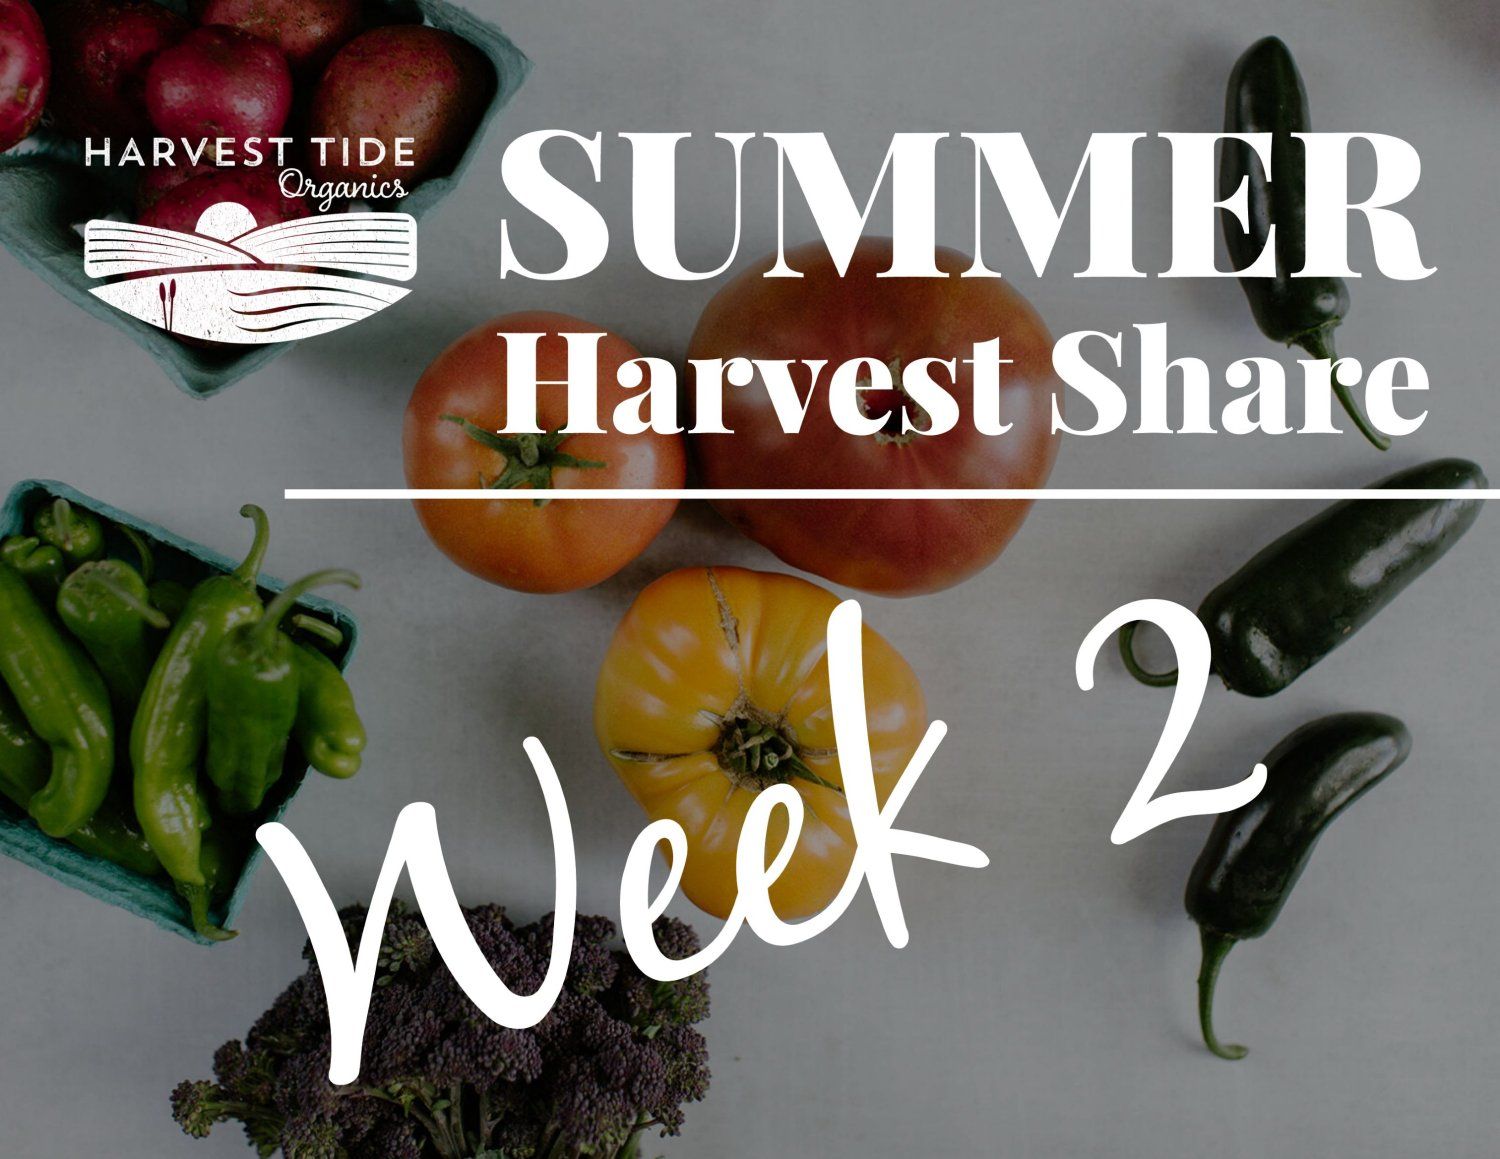 Previous Happening: Week 2 of the Summer CSA! It's beginning to feel like summer!